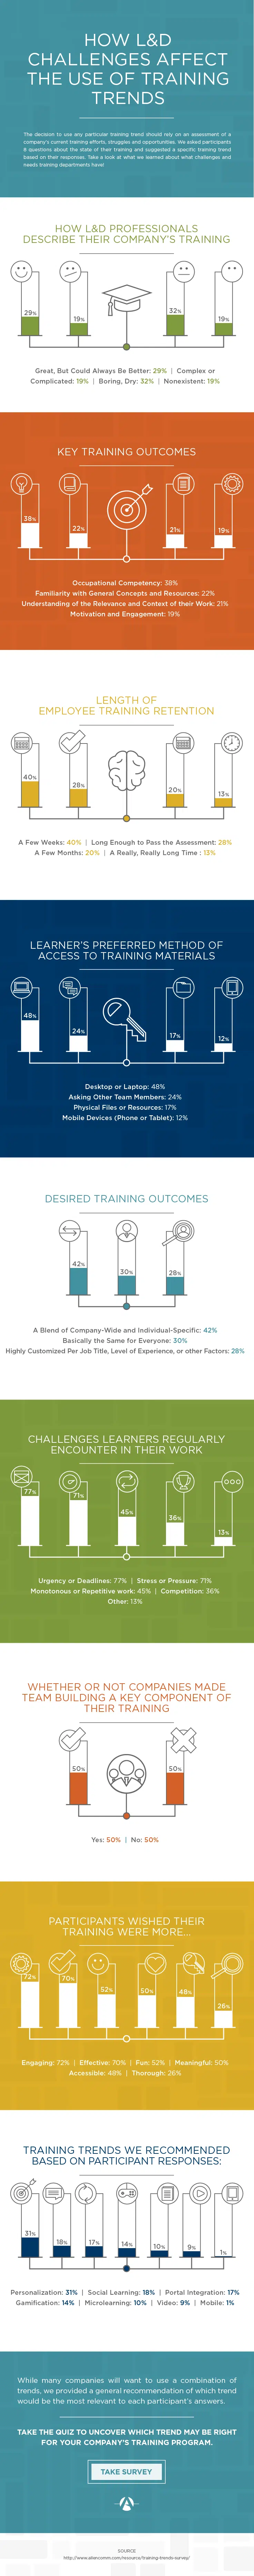 Infographic - How L&D Challenges Affect the Use of Training Trends